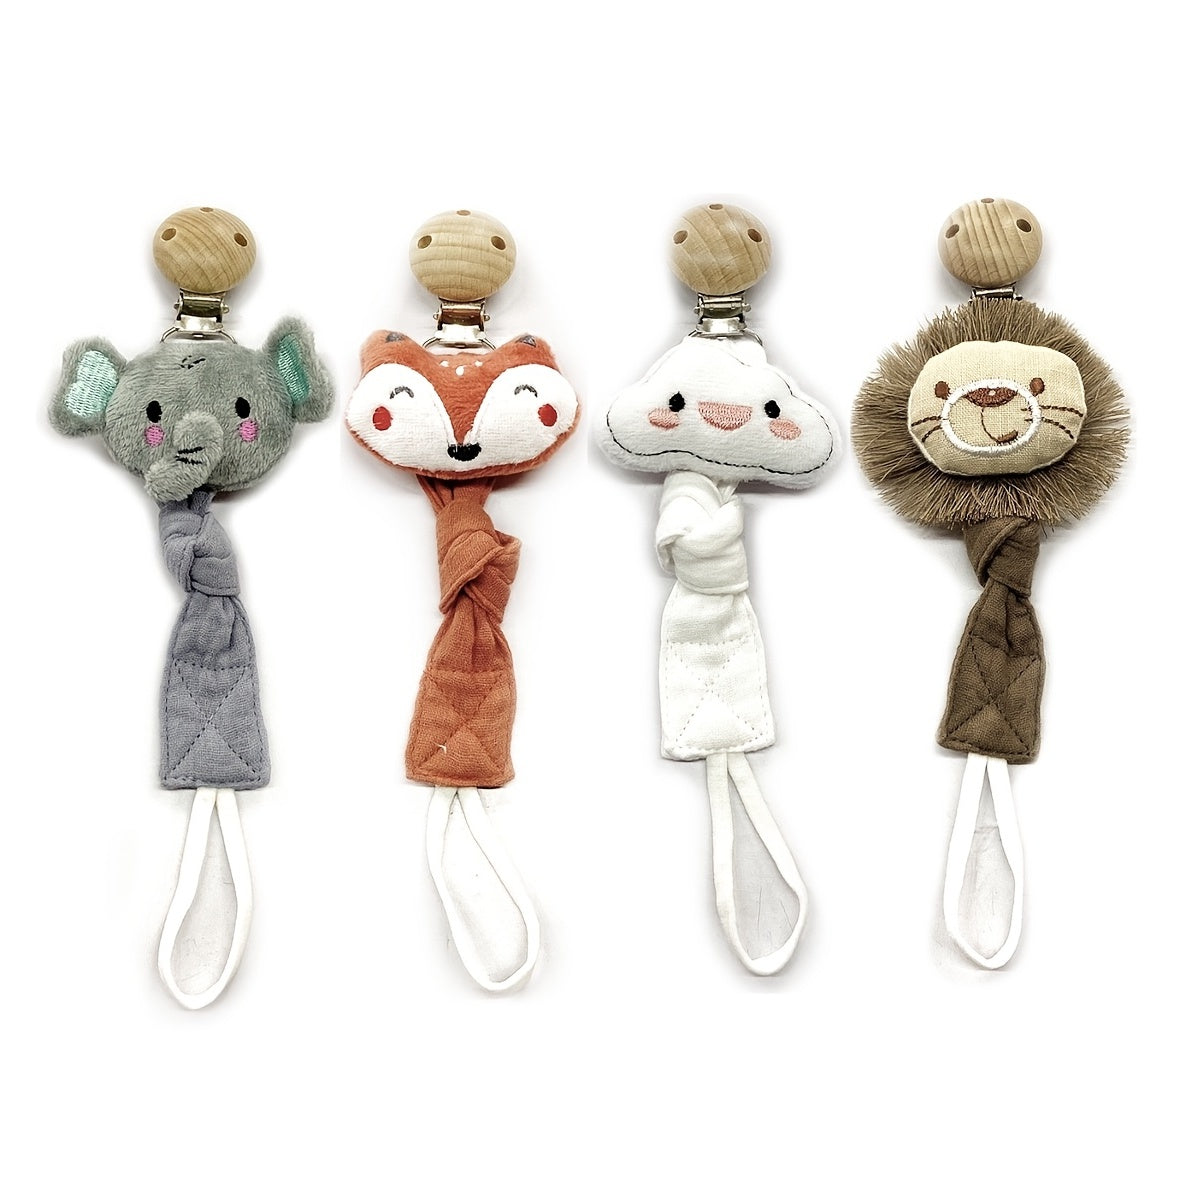 Plush Elephant Pacifier Holder, Handmade Wooden Clip Baby Teething Toy, Cotton Fabric Pacifier Holder, Ideal Baby Gift Pacifier Clip With Cartoon Toy For Boy Girl